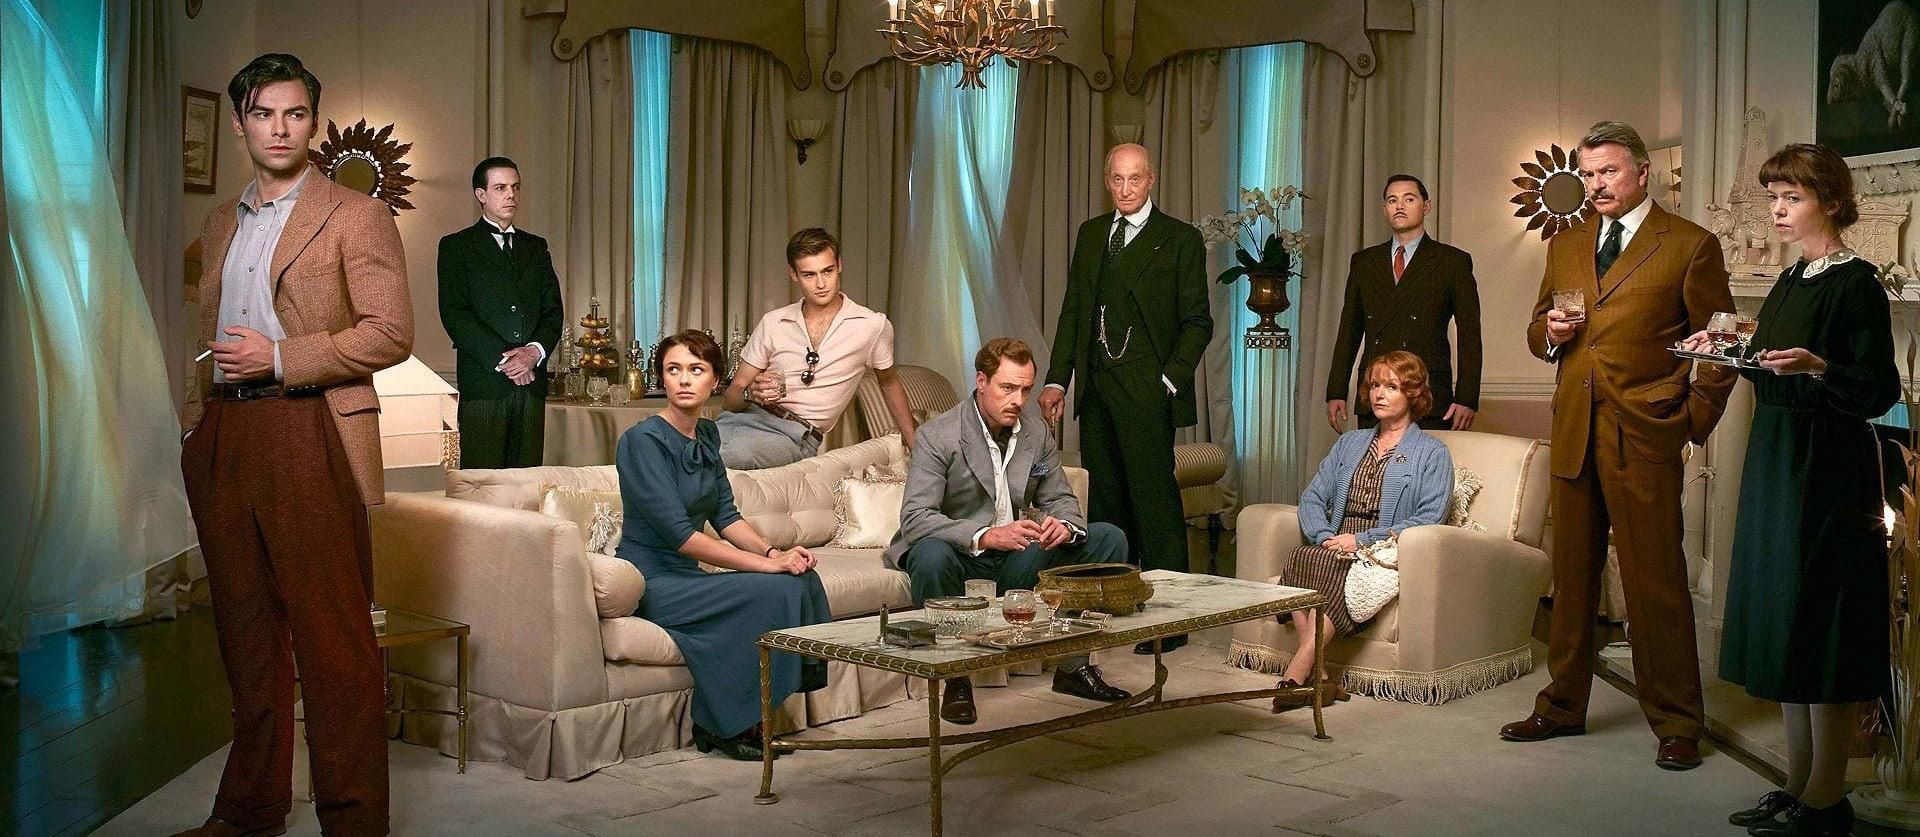 the cast of the 2015 BBC miniseries And Then There Were None, in costume, standing in a dining room or seated at the table